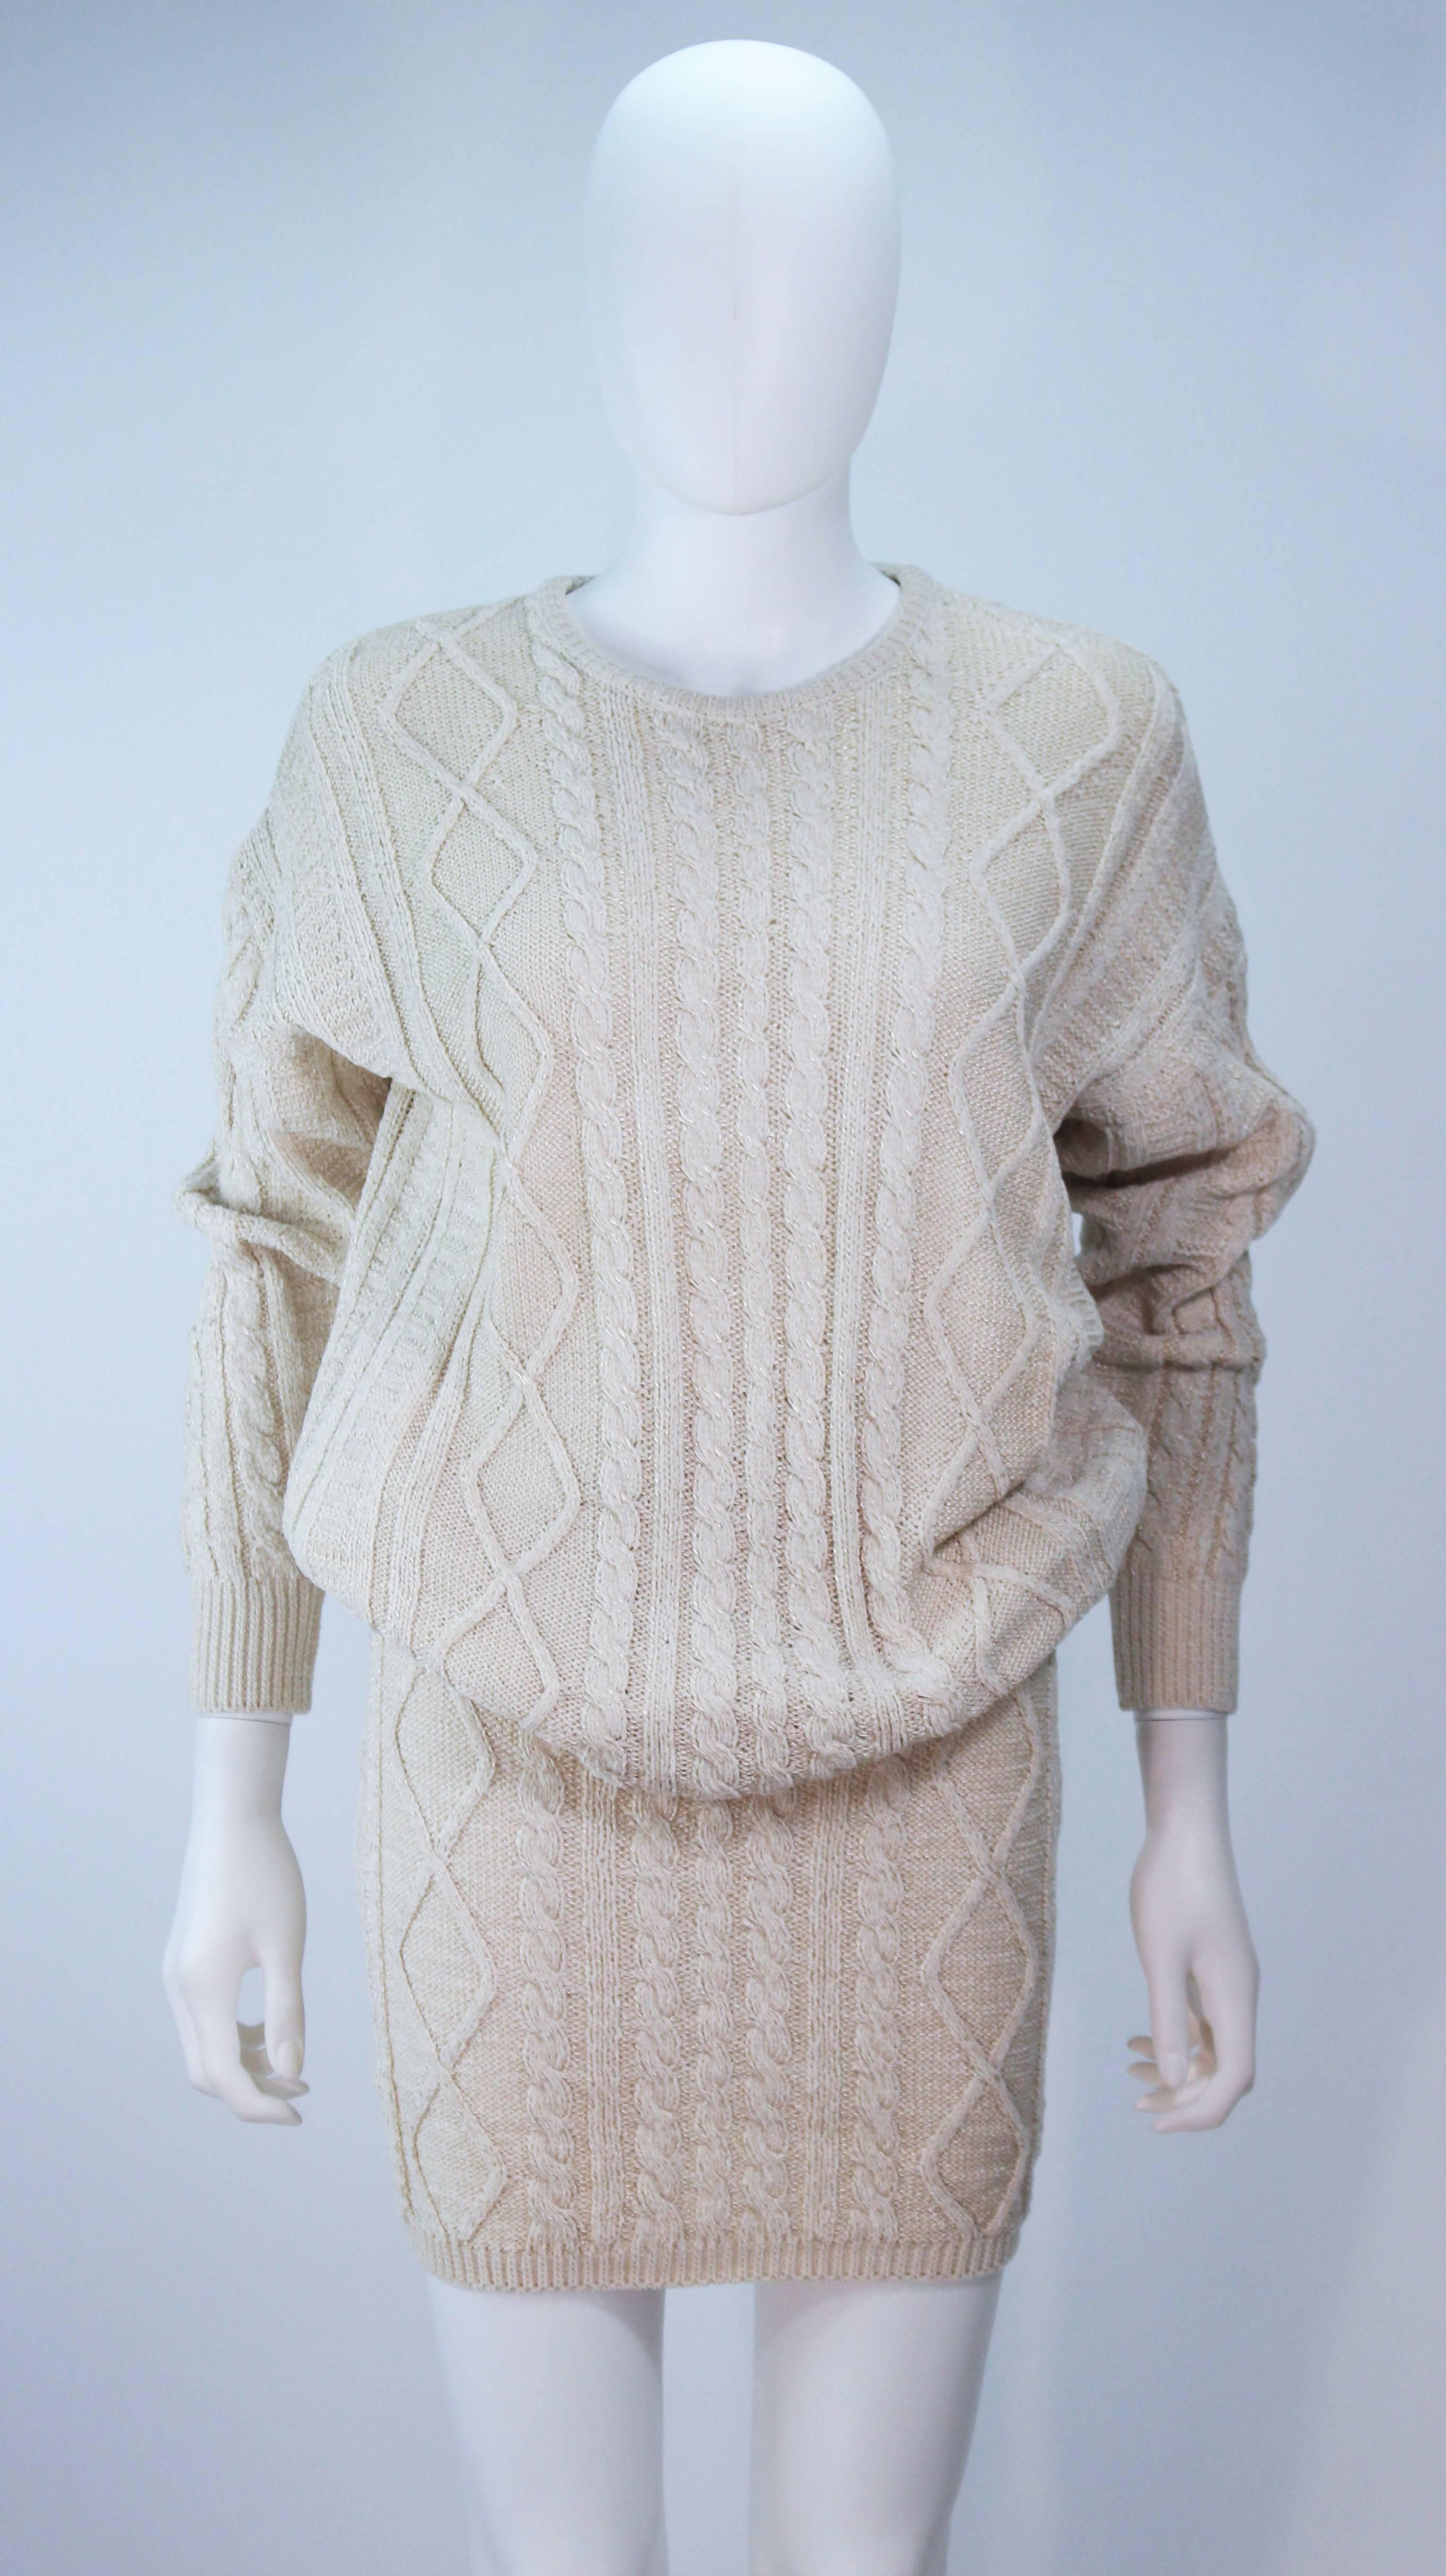 This Gianni Versace set is composed of a nude cable knit. Pull on style over sized sweater and pencil skirt. In excellent condition. 

  **Please cross-reference measurements for personal accuracy.  

Measures